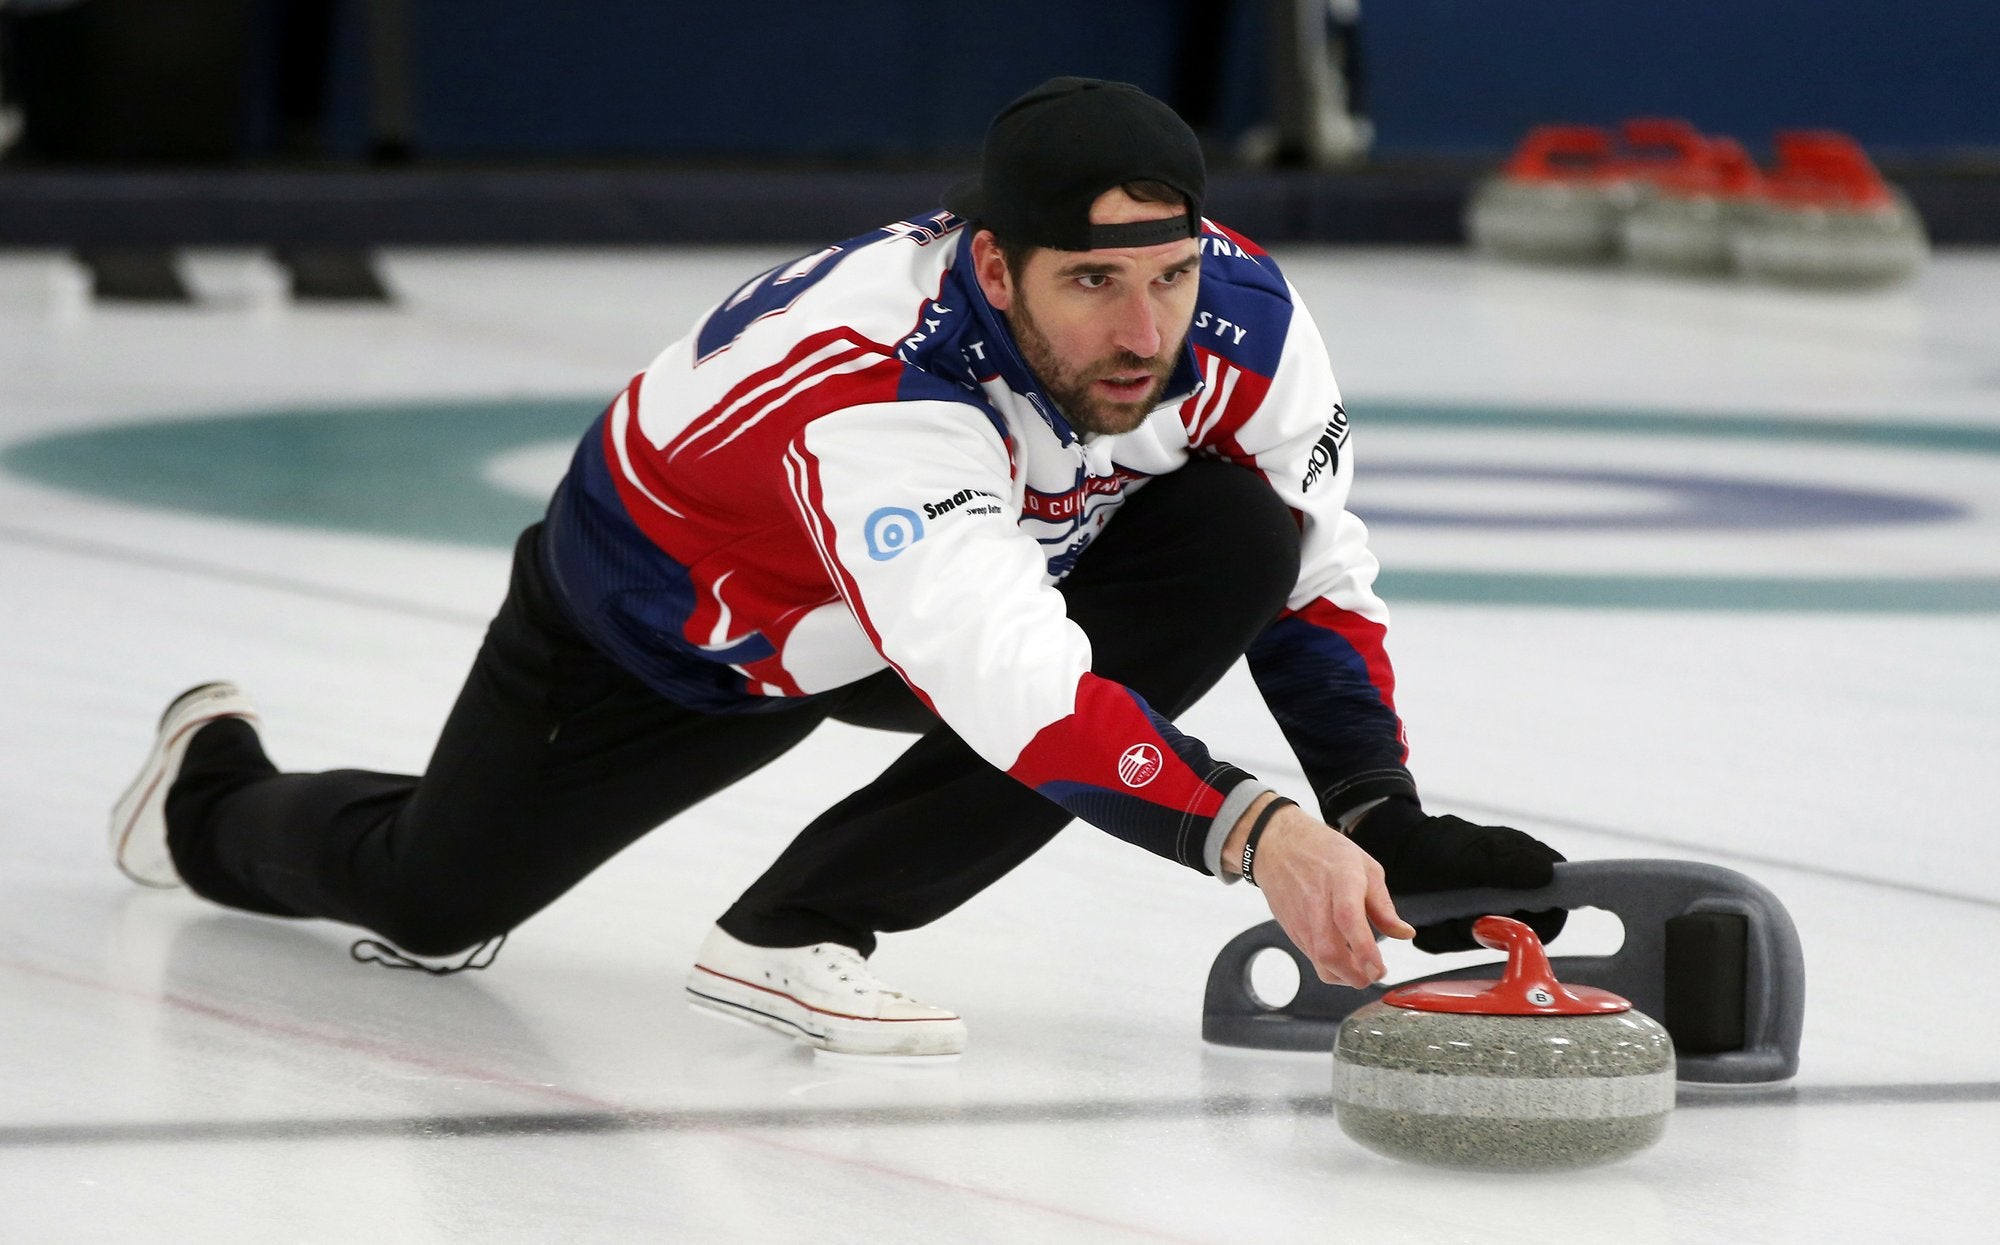 Former NFL Pro Bowl Players try curling with Olympic goal